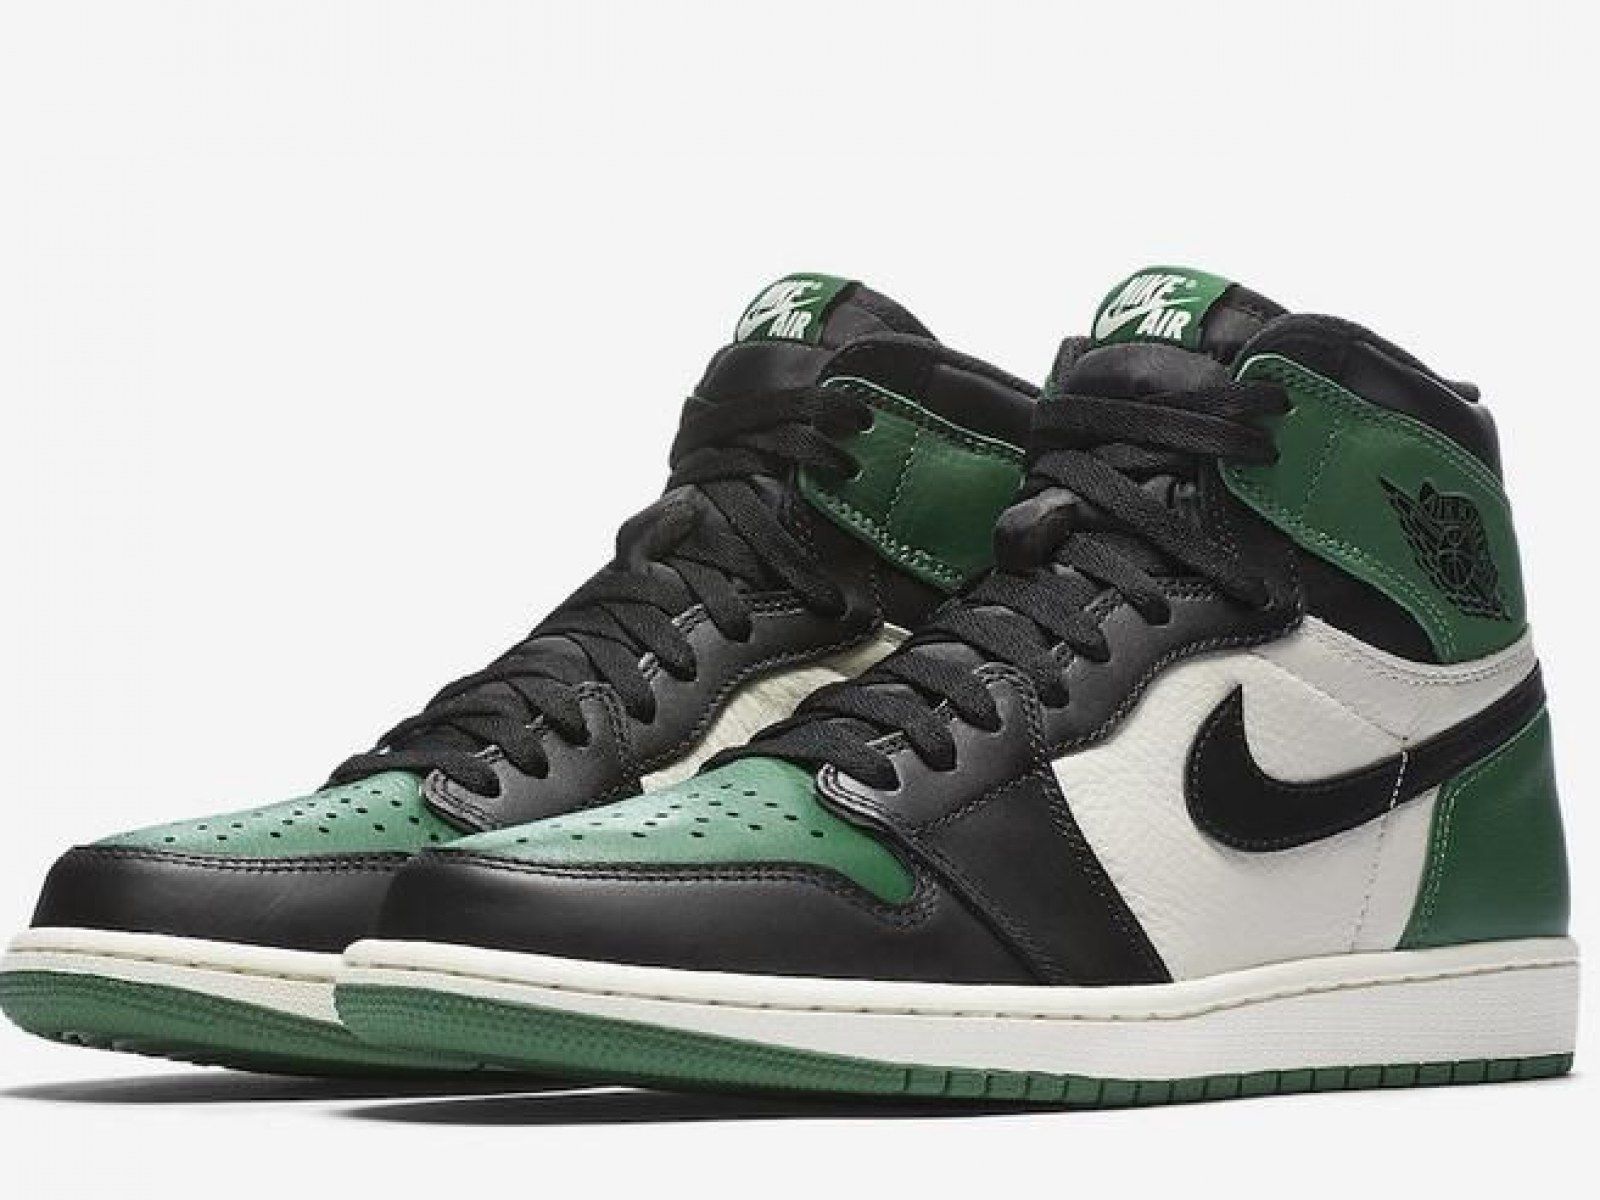 Air Jordan Cyber Monday Sale Includes Restocked 1 Retro High OG in Pine Green and 11 'Space Jam, ' 'Win Like '82' Shoes